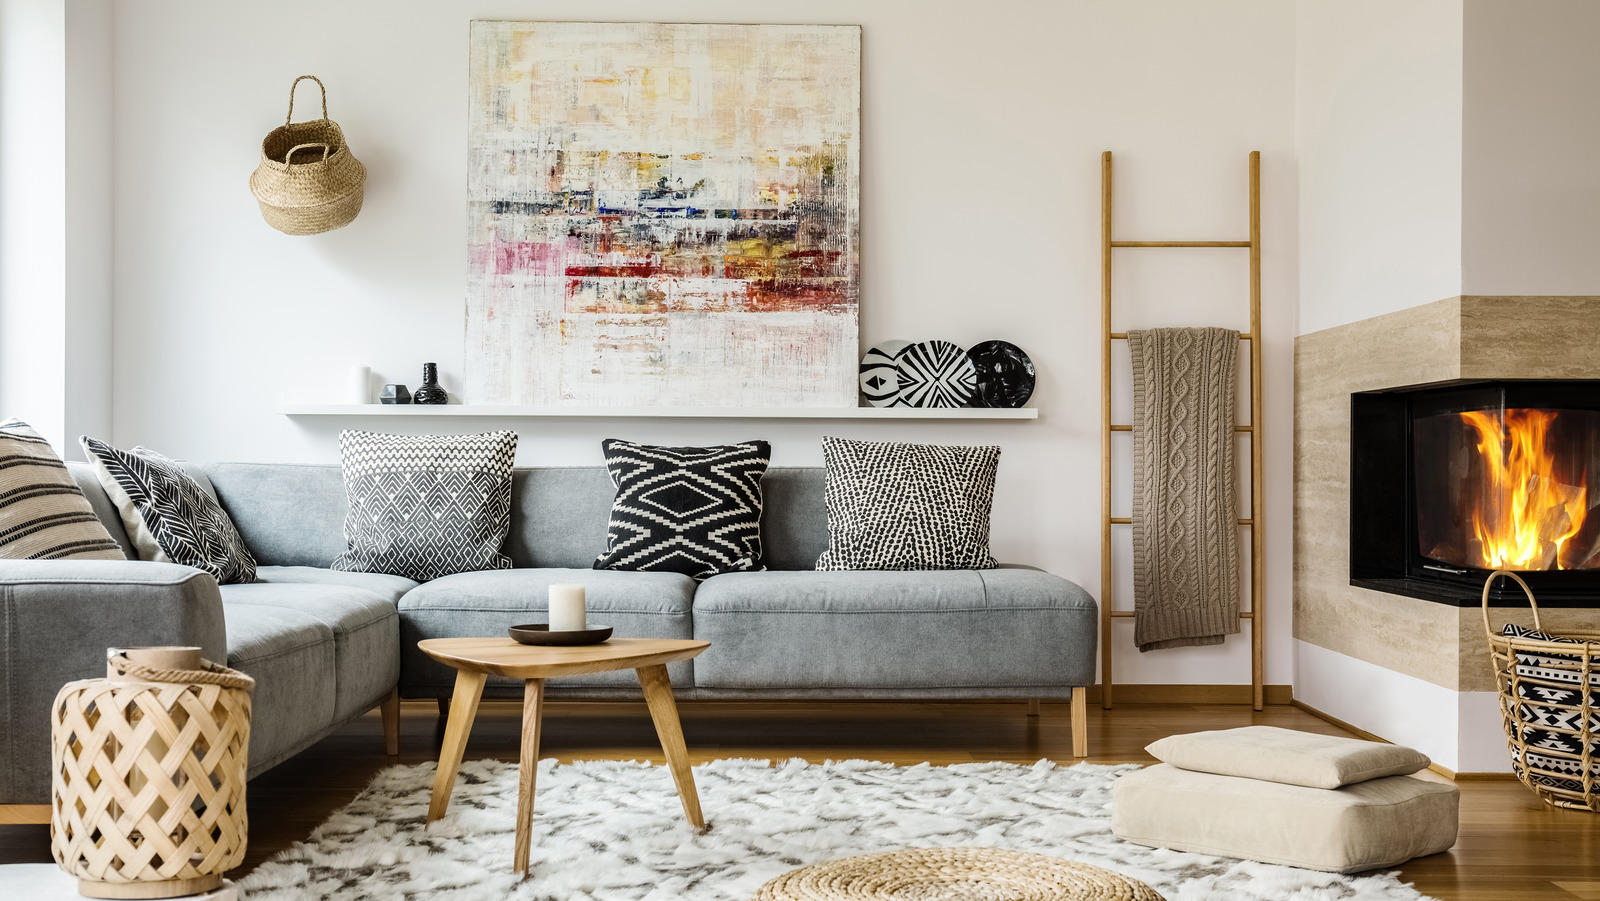 https://www.housedigest.com/img/gallery/4-simple-tips-for-arranging-your-throw-pillows-to-get-the-perfect-look/l-intro-1658579510.jpg